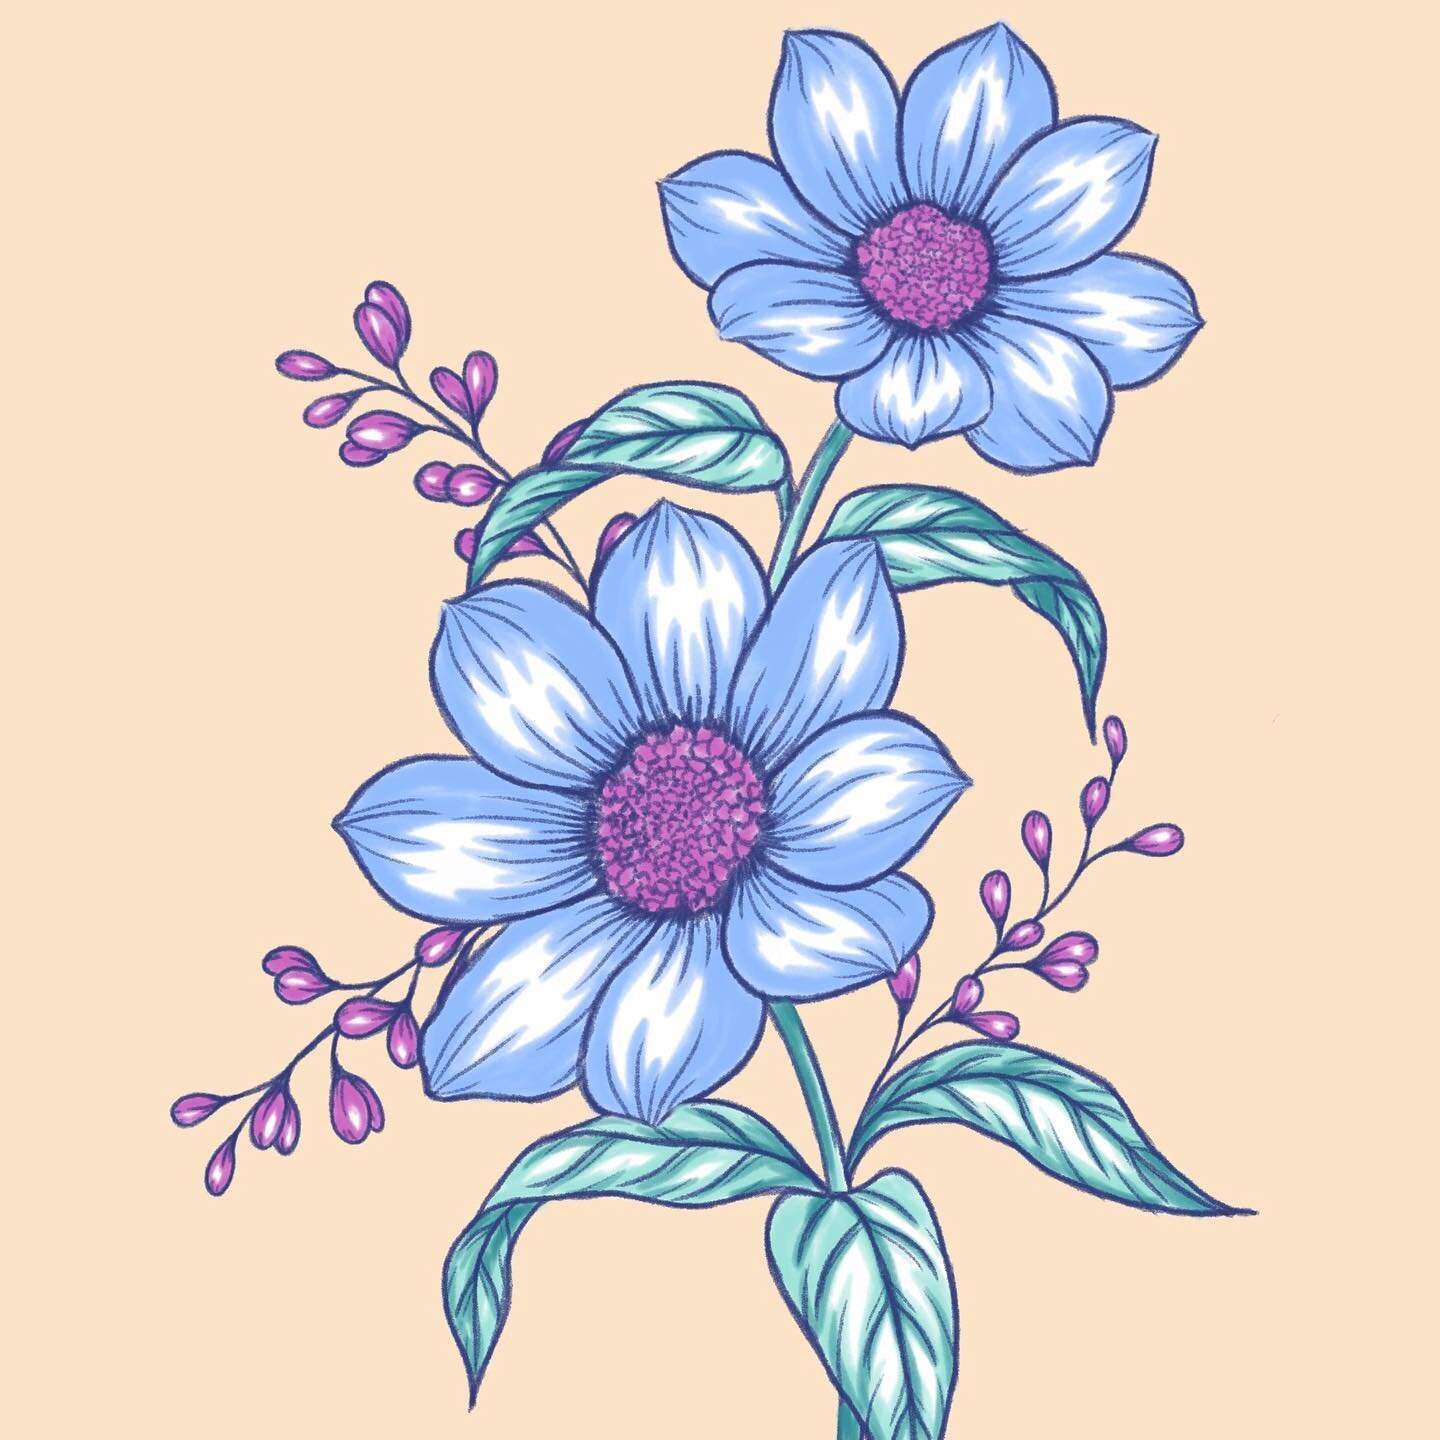 Day 96/100... Back to some digitally drawn florals, I drew these on my iPad in #procreate #floralsketch #digitalart #digitaldrawing #pencildrawing #flower #floralart #flowerdrawing #ipadart #applepencil #ipadpro #floral #floraldrawing #botanical #bot